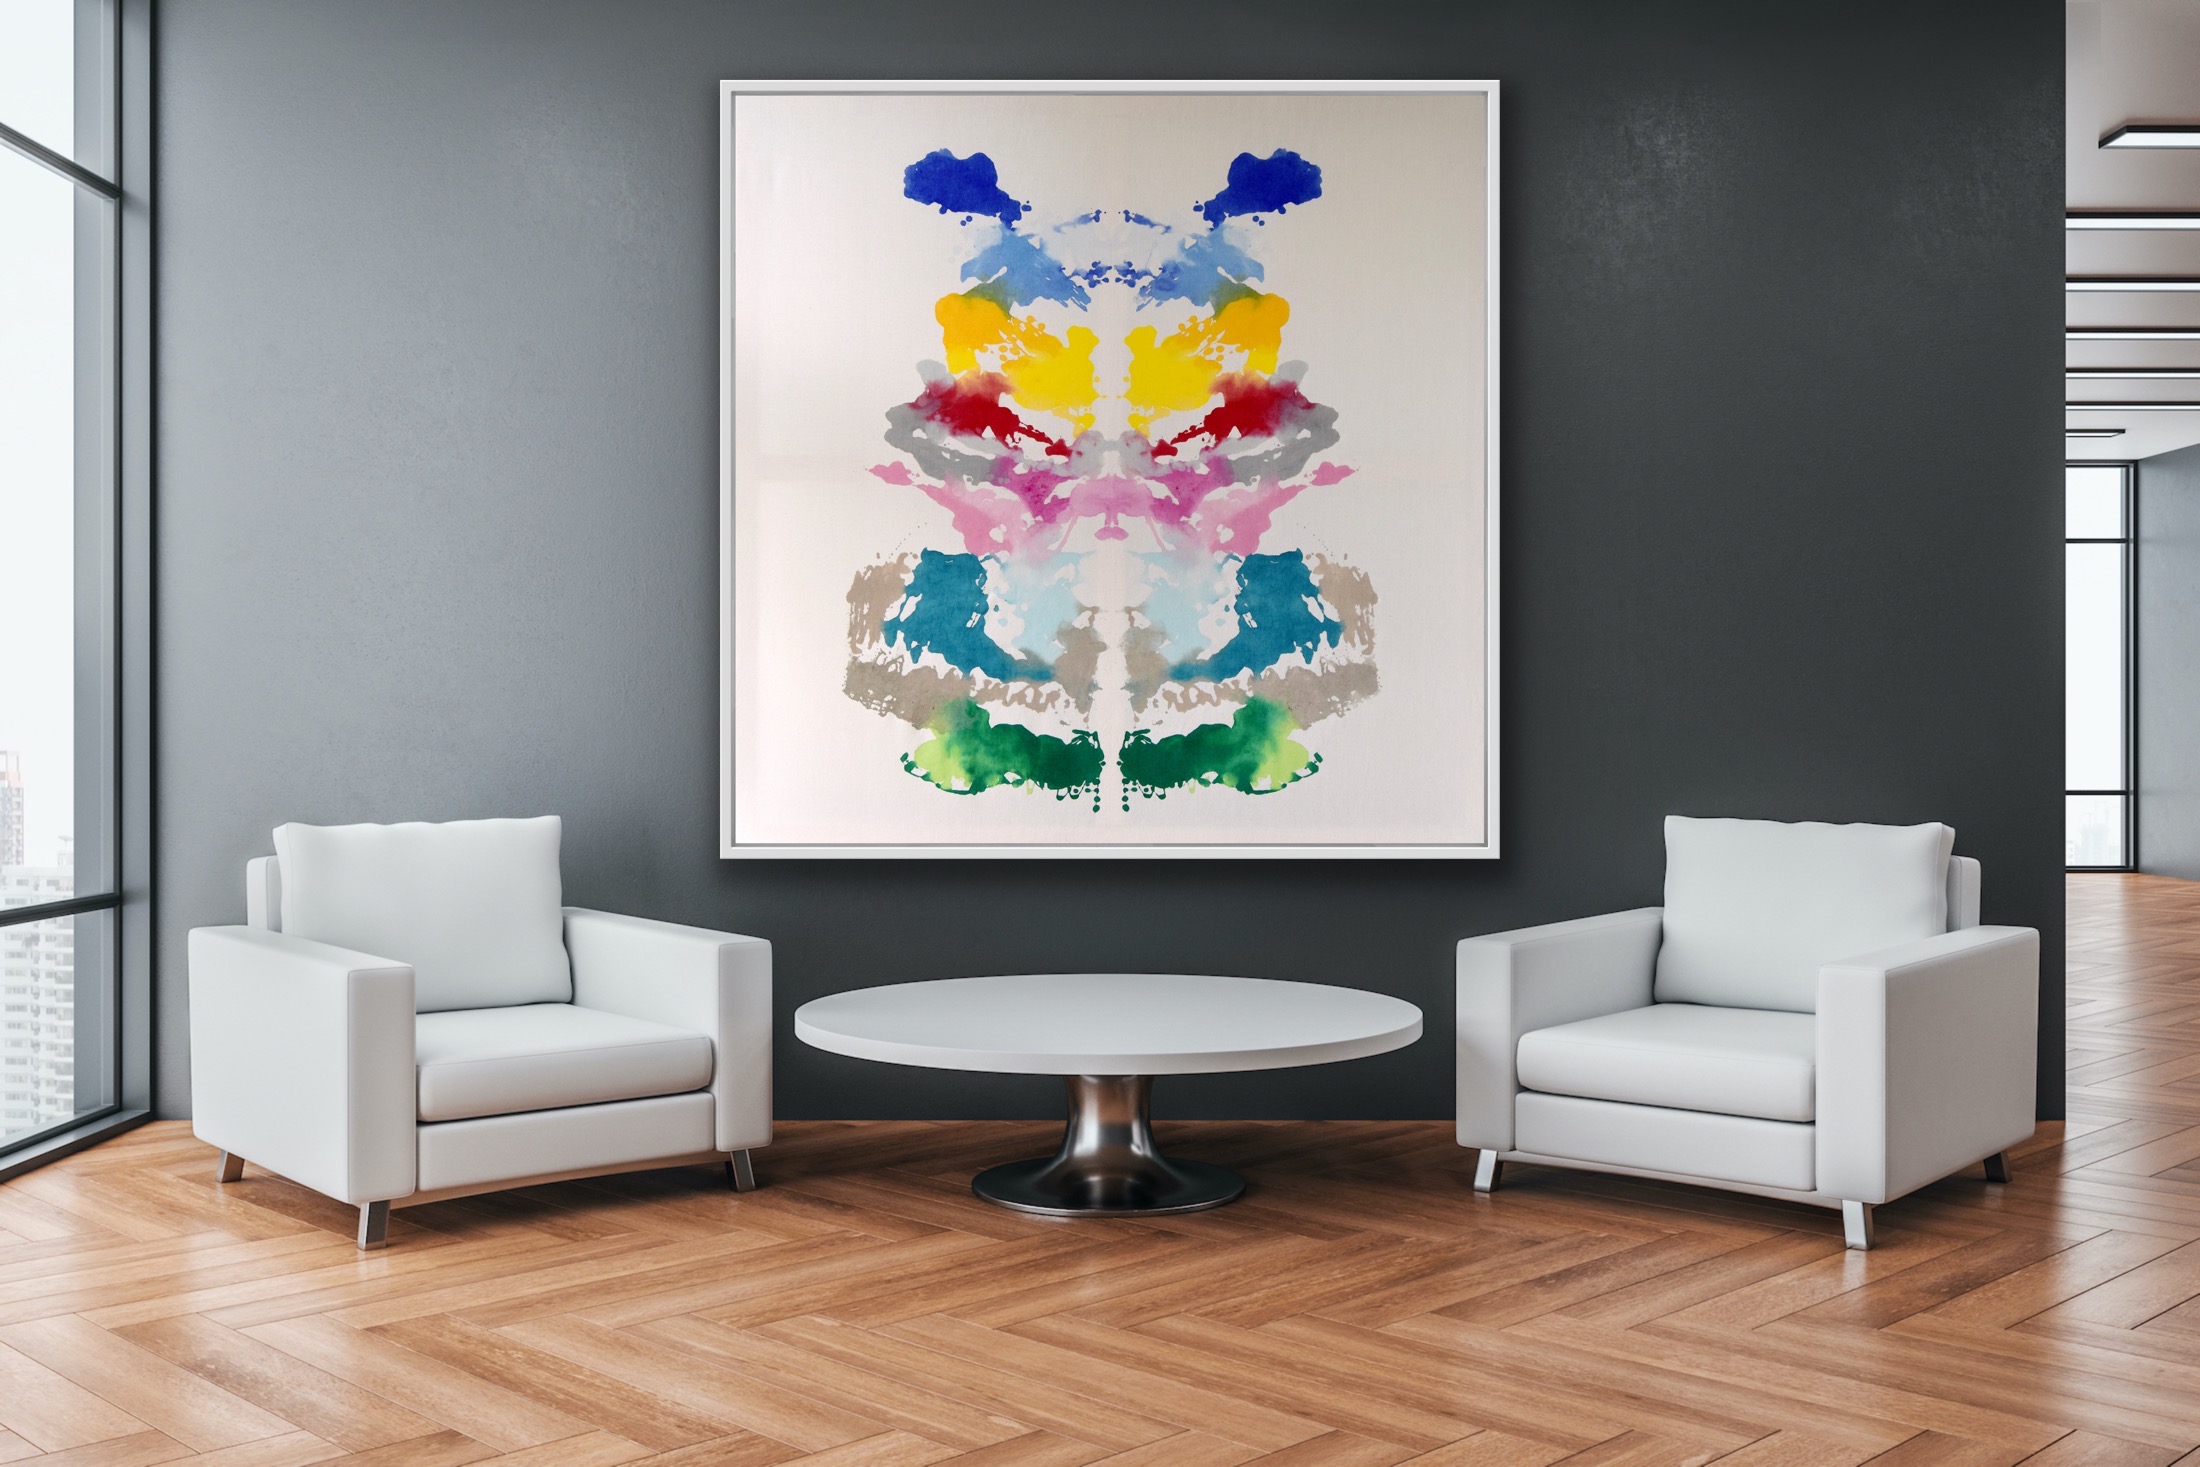 Abstract and contemporary art painting from Astrid Stoeppel. Astrid Stöppel is a professional german woman artist located near to Munich. Buy her artworks online at Saatchi Art or Singulart Shop. Purchase modern art to invest.